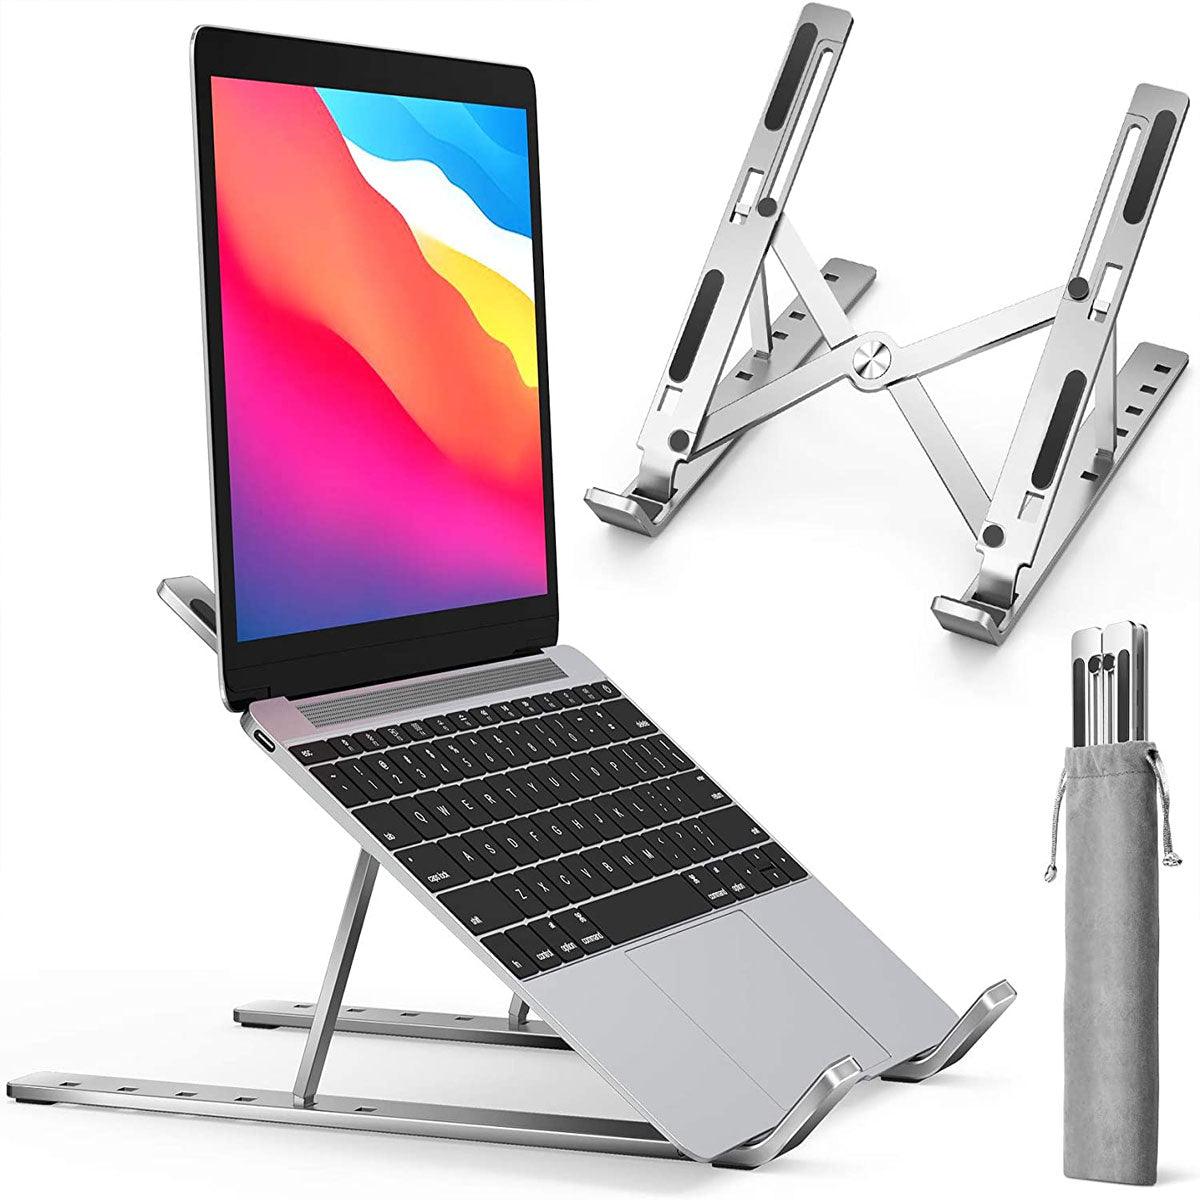 Portable Laptop Stand - TruVeli